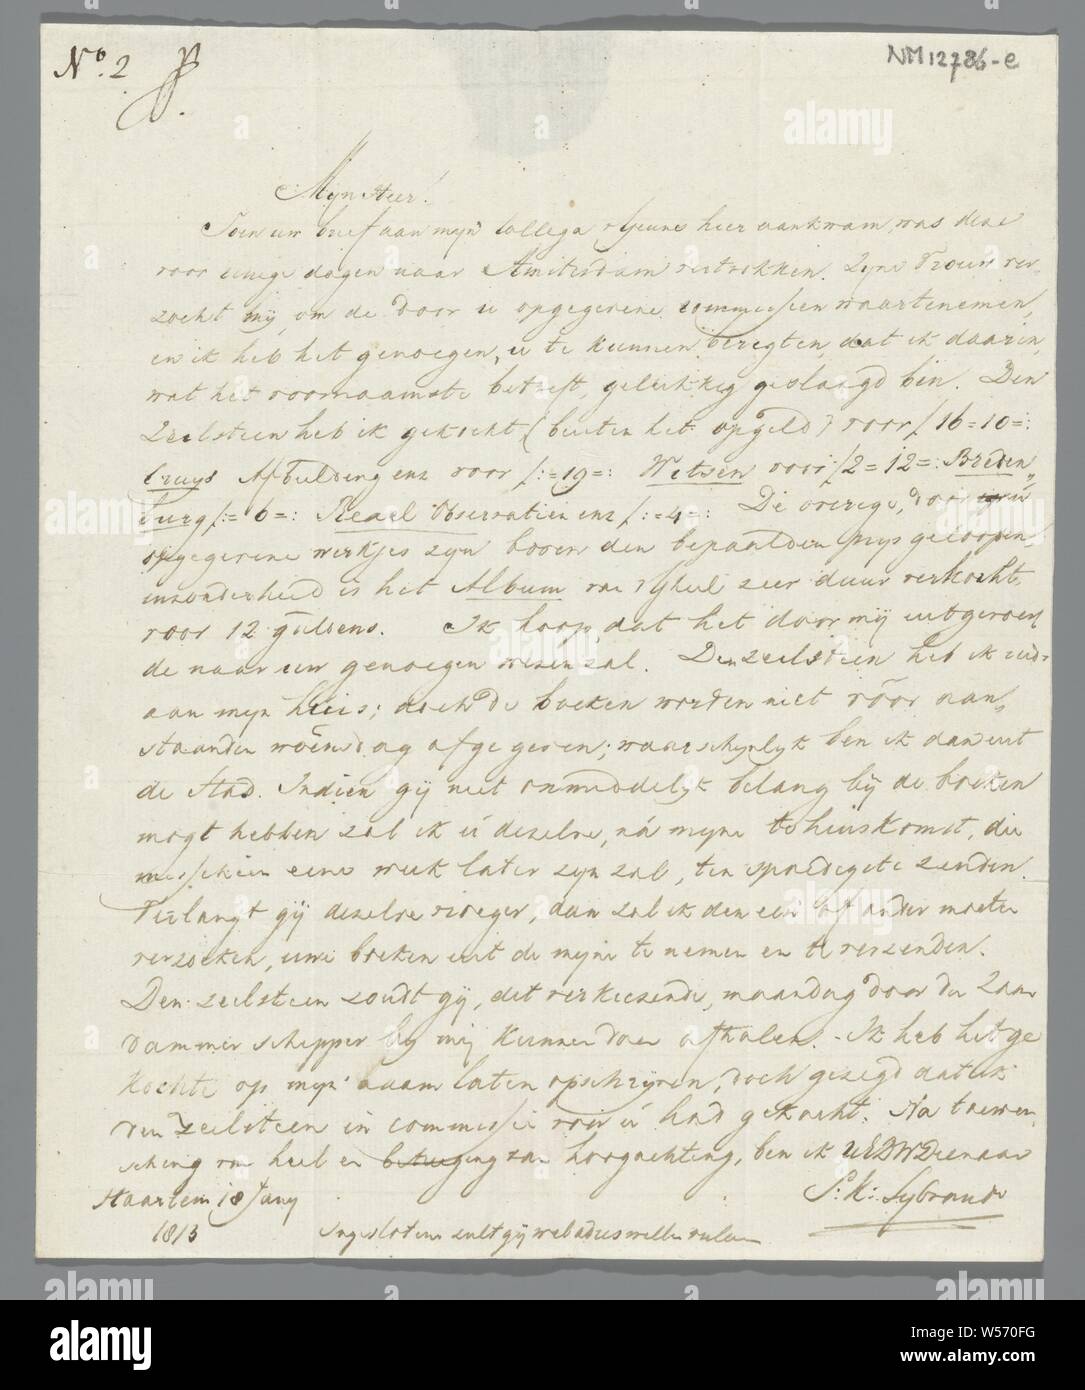 Letter from S. K. Sybrandi to J. Scheltema June 18, 1813, Handwritten letter, was folded and taped up with lacquer and addressed to J. Scheltema with stamp from Haarlem, cut off at the paint. Signed, r.o .: S: K: Sybrandi. Dated, 10: Haarlem 18 Juny / 1813. Marked, watermark: D & C BLUE. Inscription, p.1, lb .: No 2 and p.4: H (?) / HAARLEM / Den Heere / J: Scheltema / Vrederegter / te / Zaandam, Zaandam, Peter I the Great (Tsar of Russia), S. K. Sybrandi, Haarlem, 18-Jun-1813, paper, lacquer (coating), ink, l 22.9 cm × w 18.8 cm Stock Photo